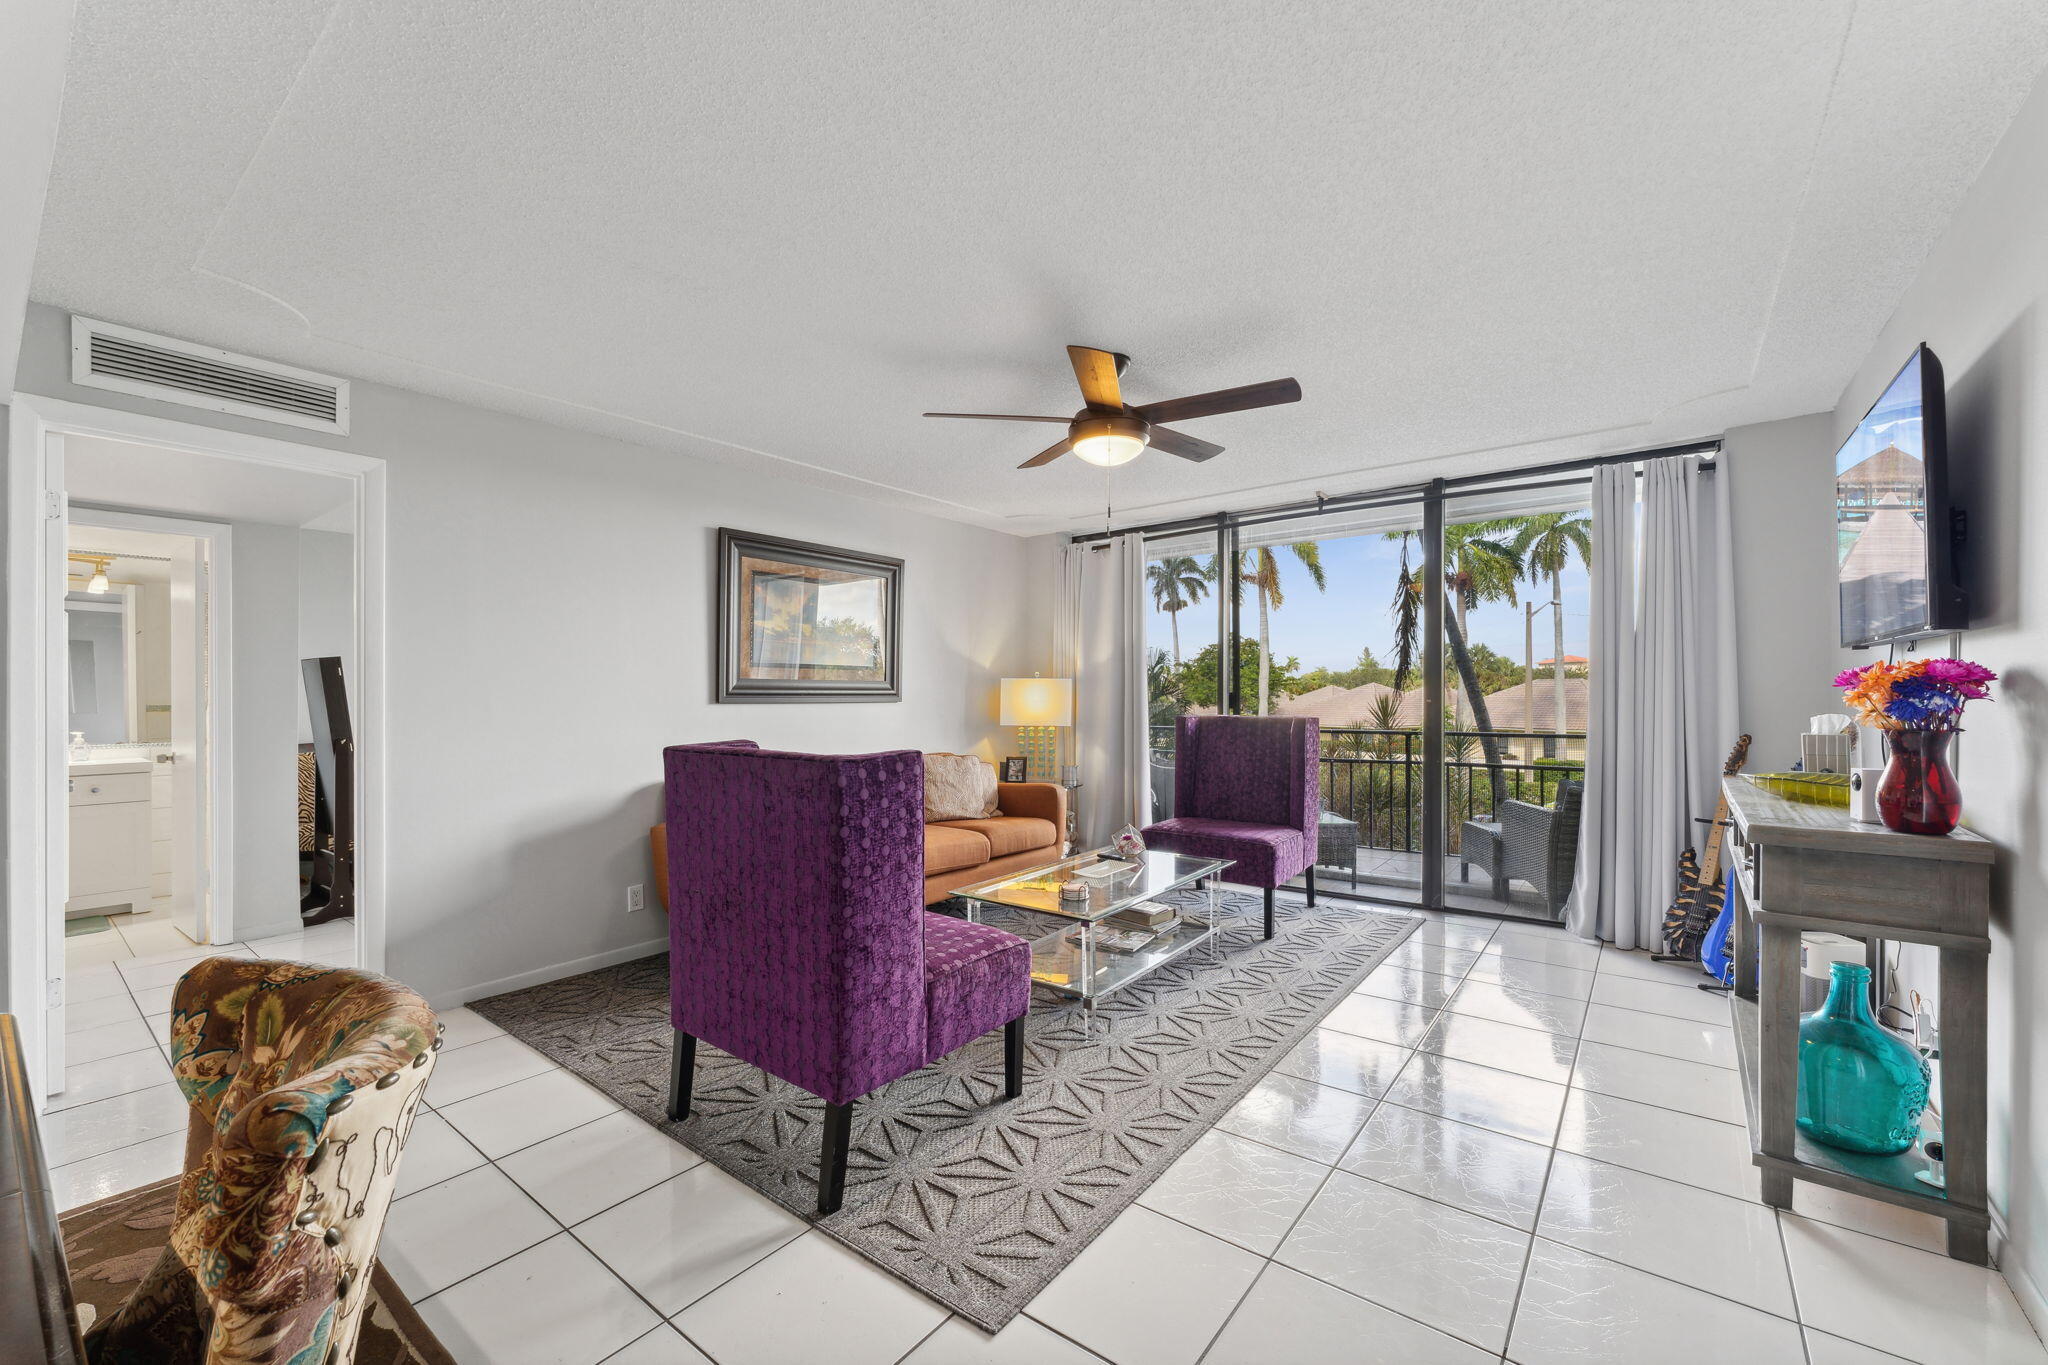 1500 Presidential Way 202, West Palm Beach, Palm Beach County, Florida - 2 Bedrooms  
2 Bathrooms - 